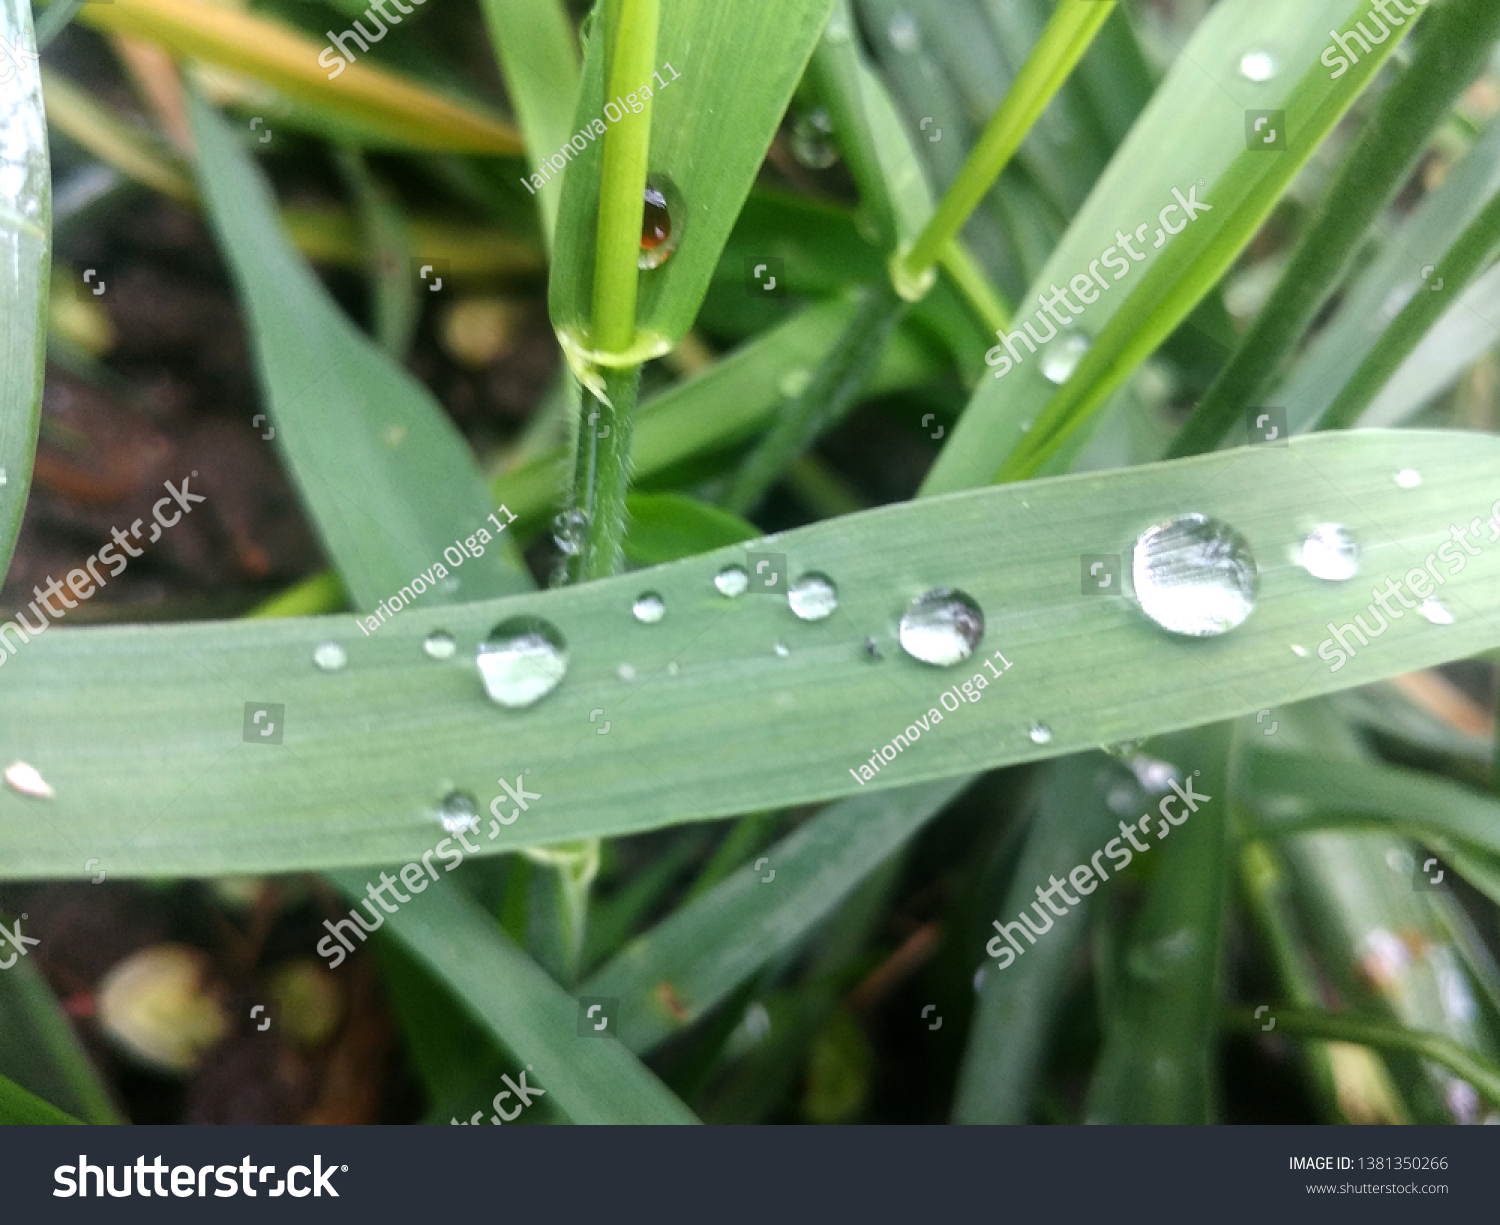 Grass with dew drops background #1381350266